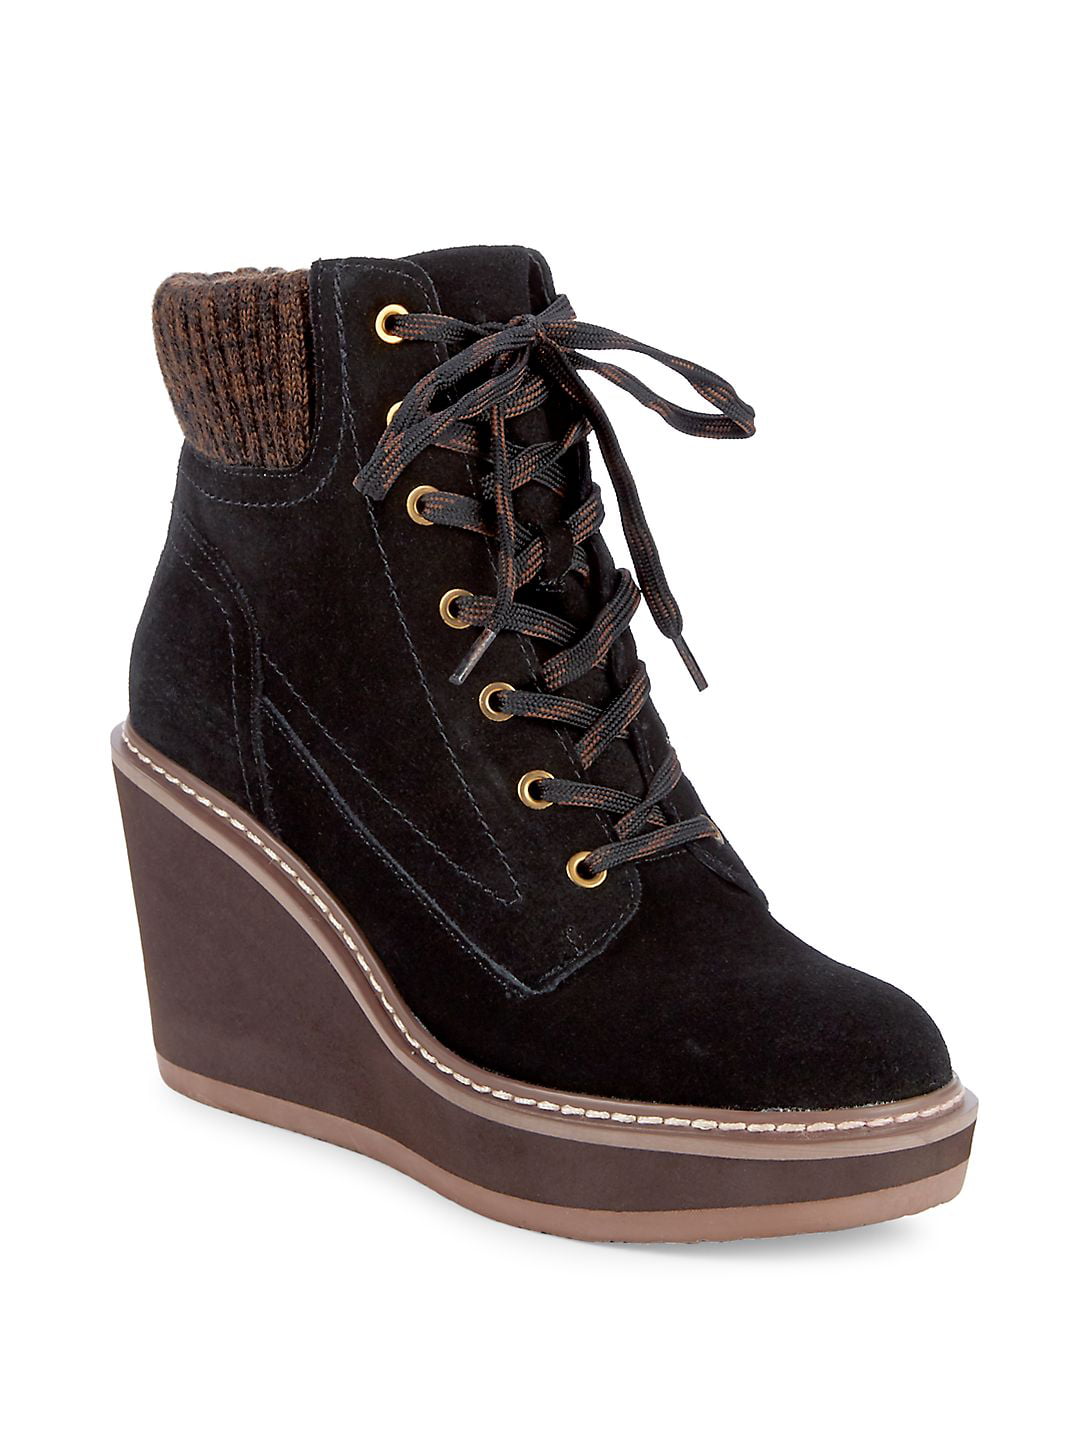 Womens Tommy Solenne Wedge Ankle Boots, Black Multi - Walmart.com